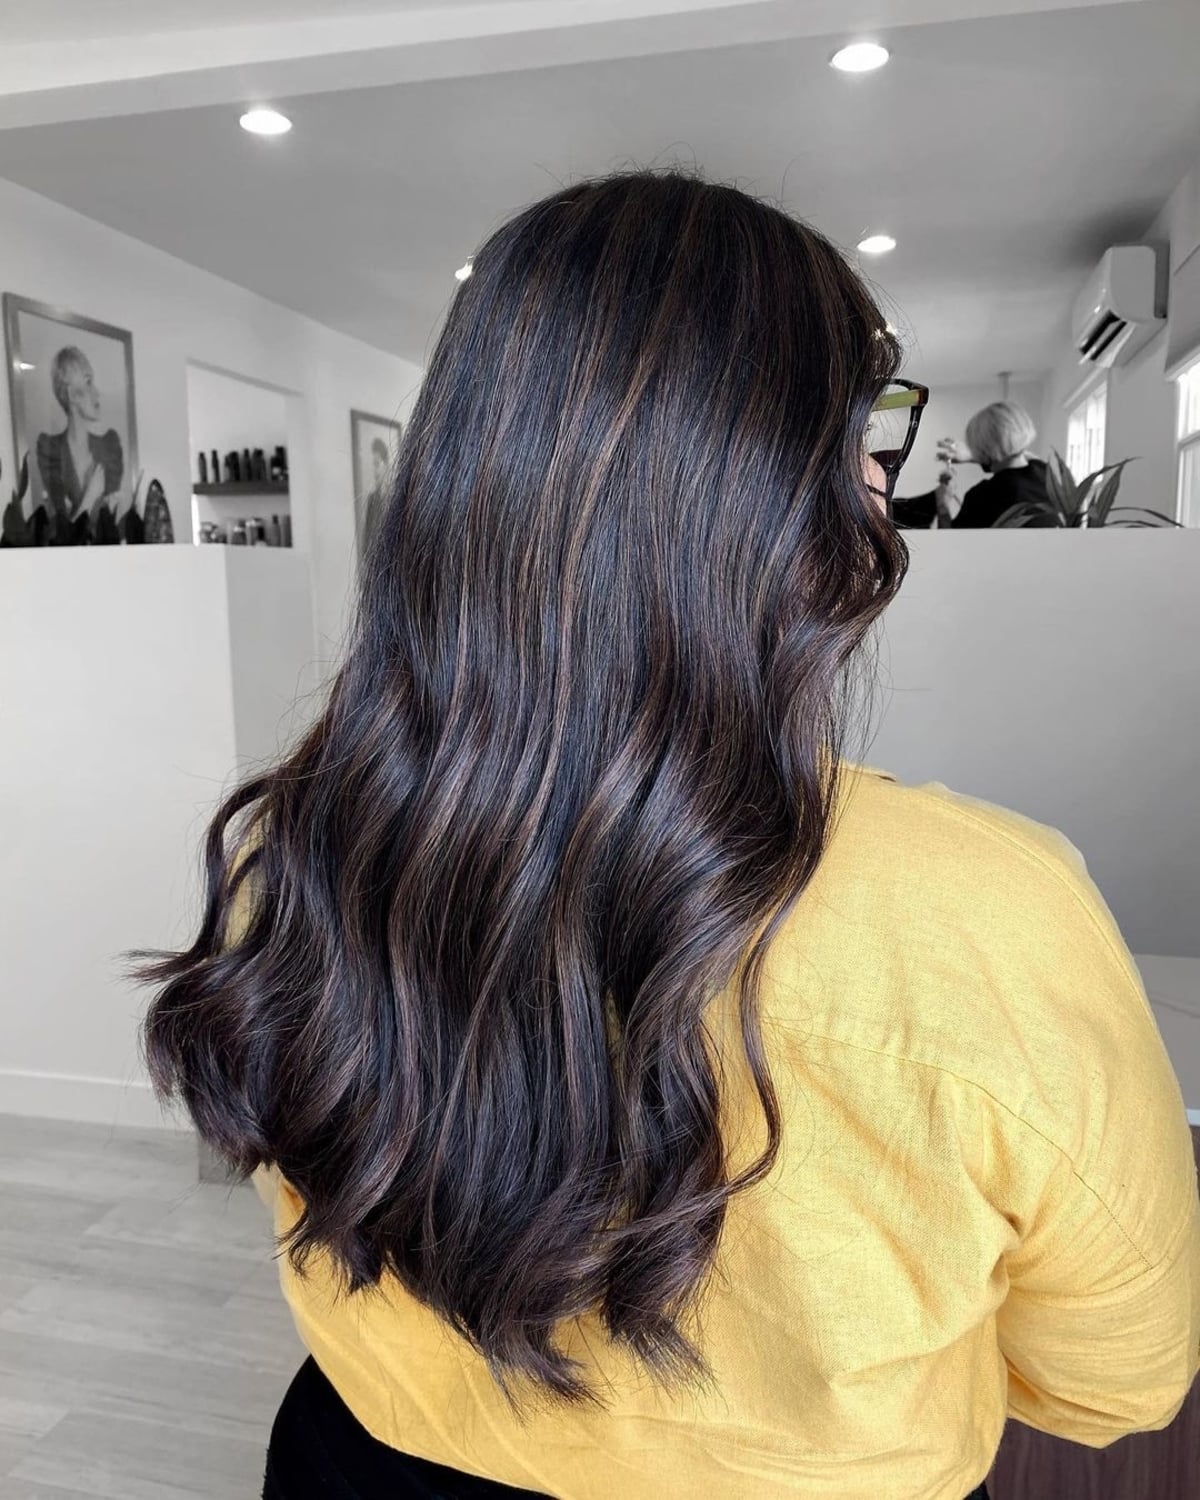 Low-maintenance black hair with subtle highlights